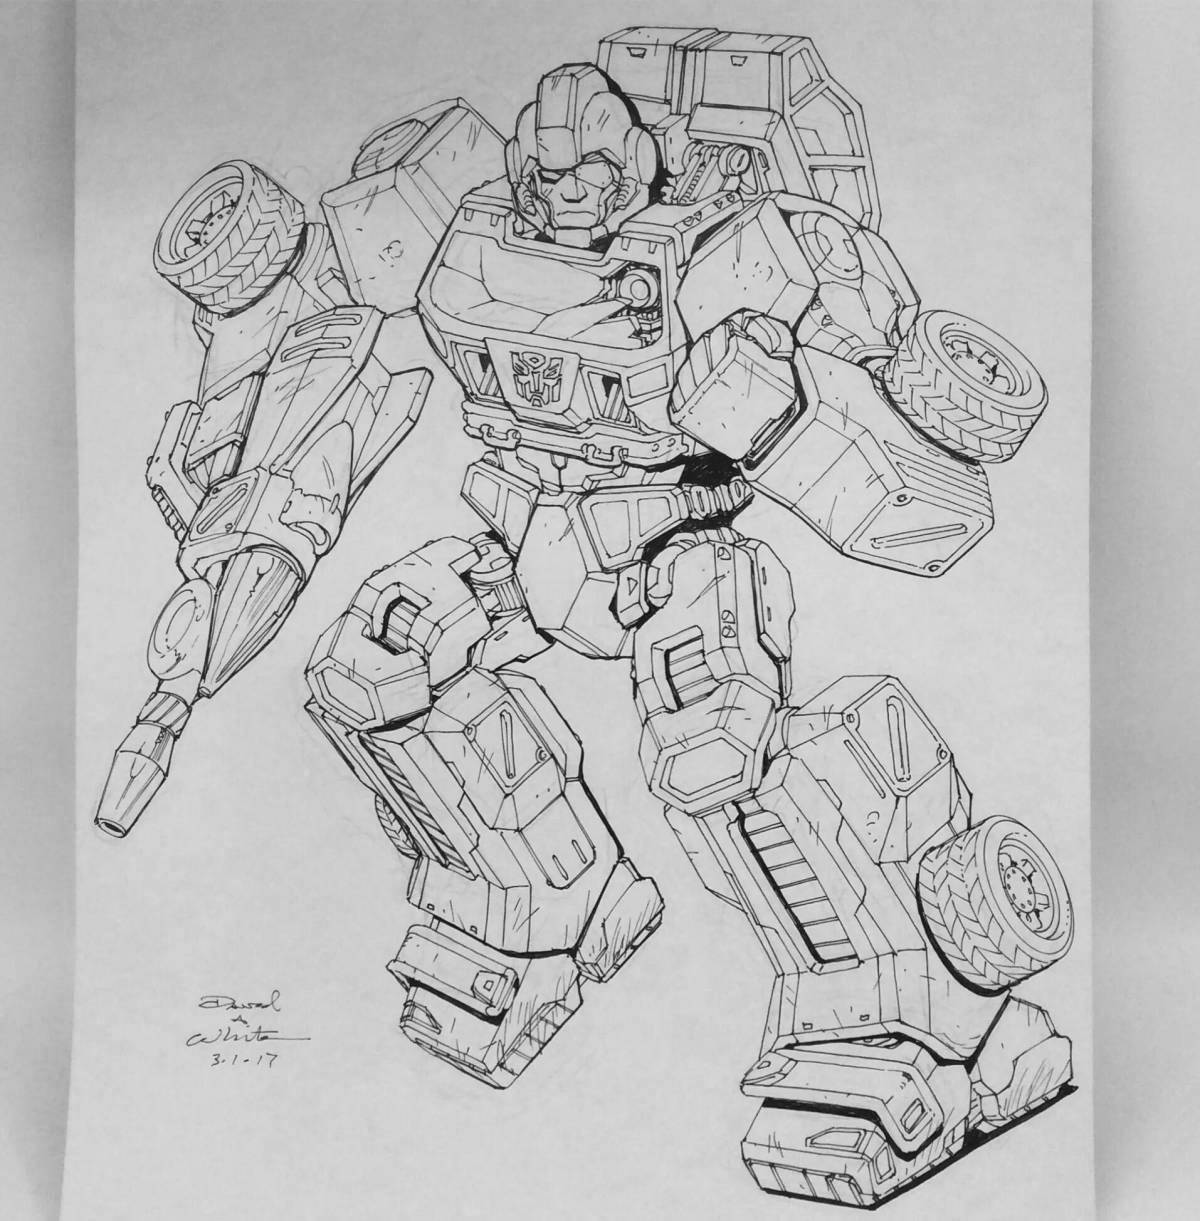 Coloring book cheeky ironhide